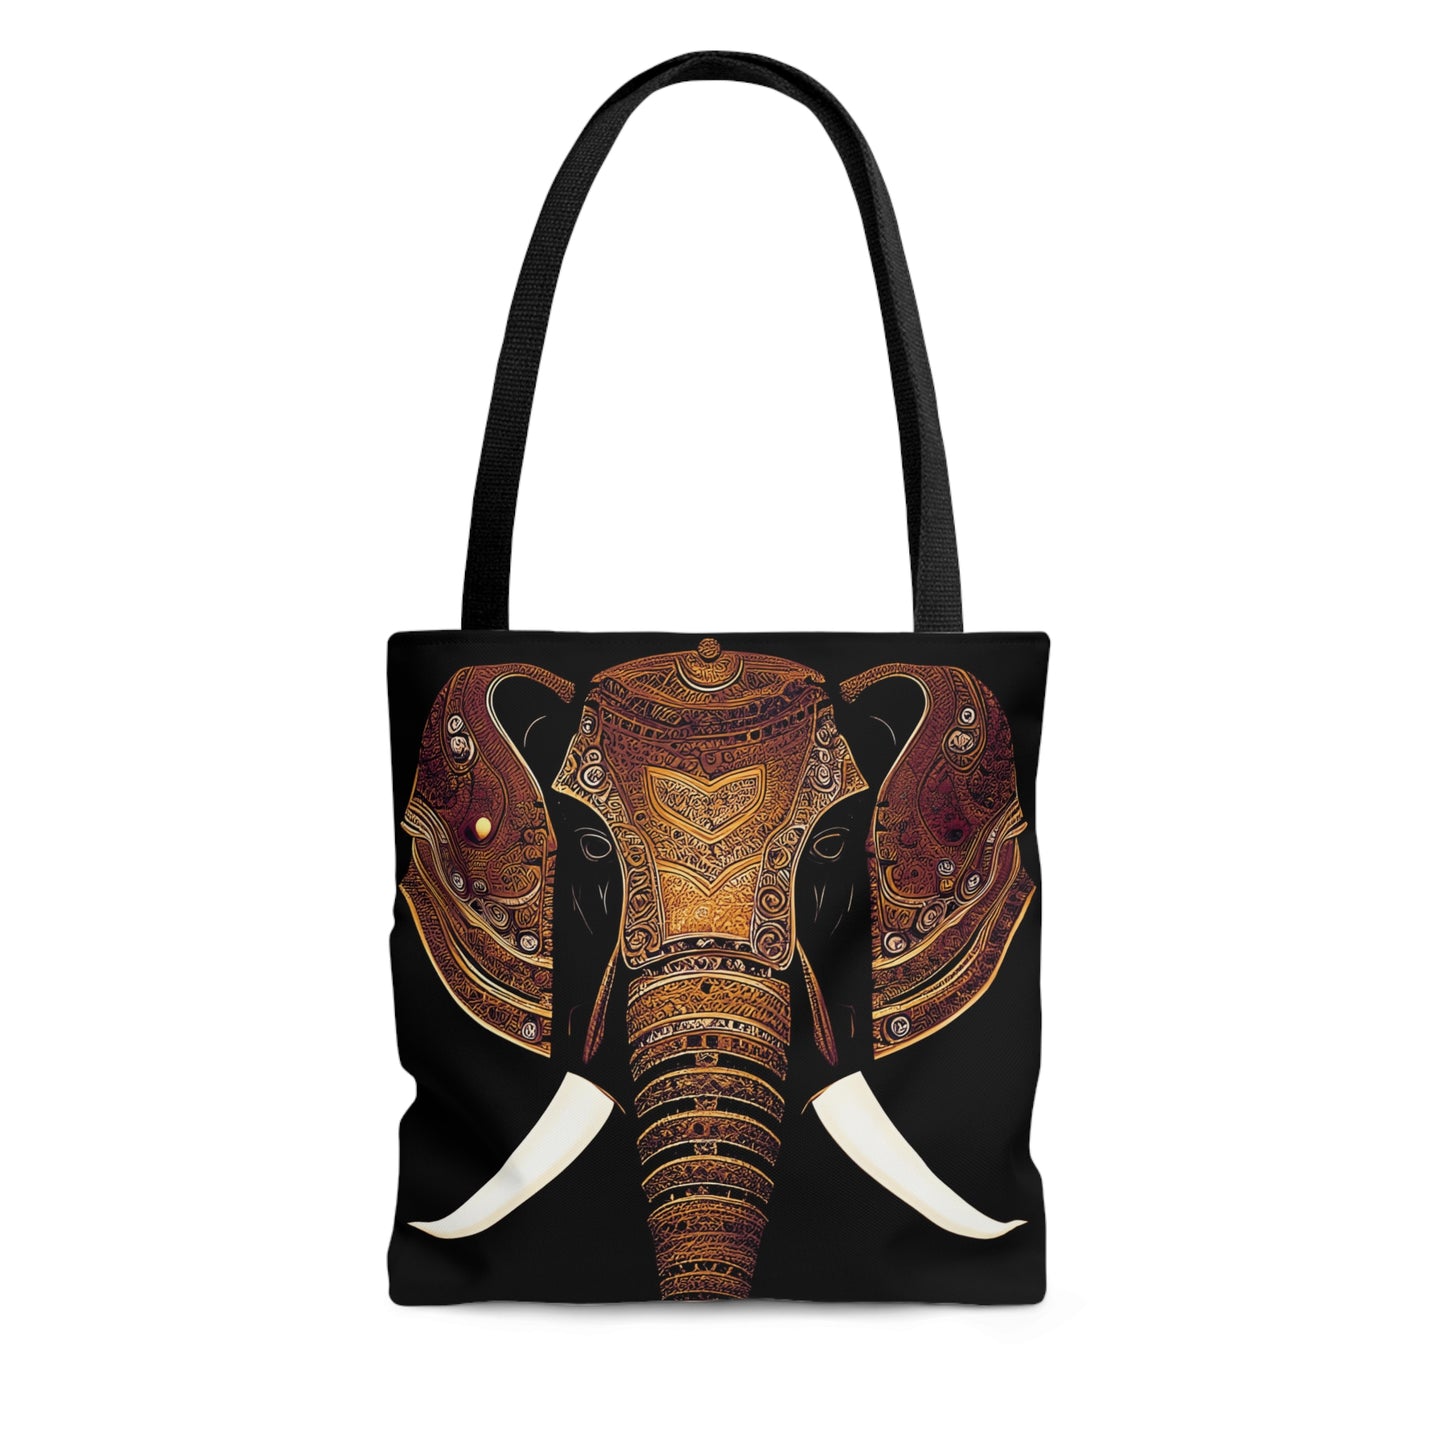 Elephant Themed Bags and Travel Accessories - Indian Elephant Head With Parade Colors Printed on Tote Bag